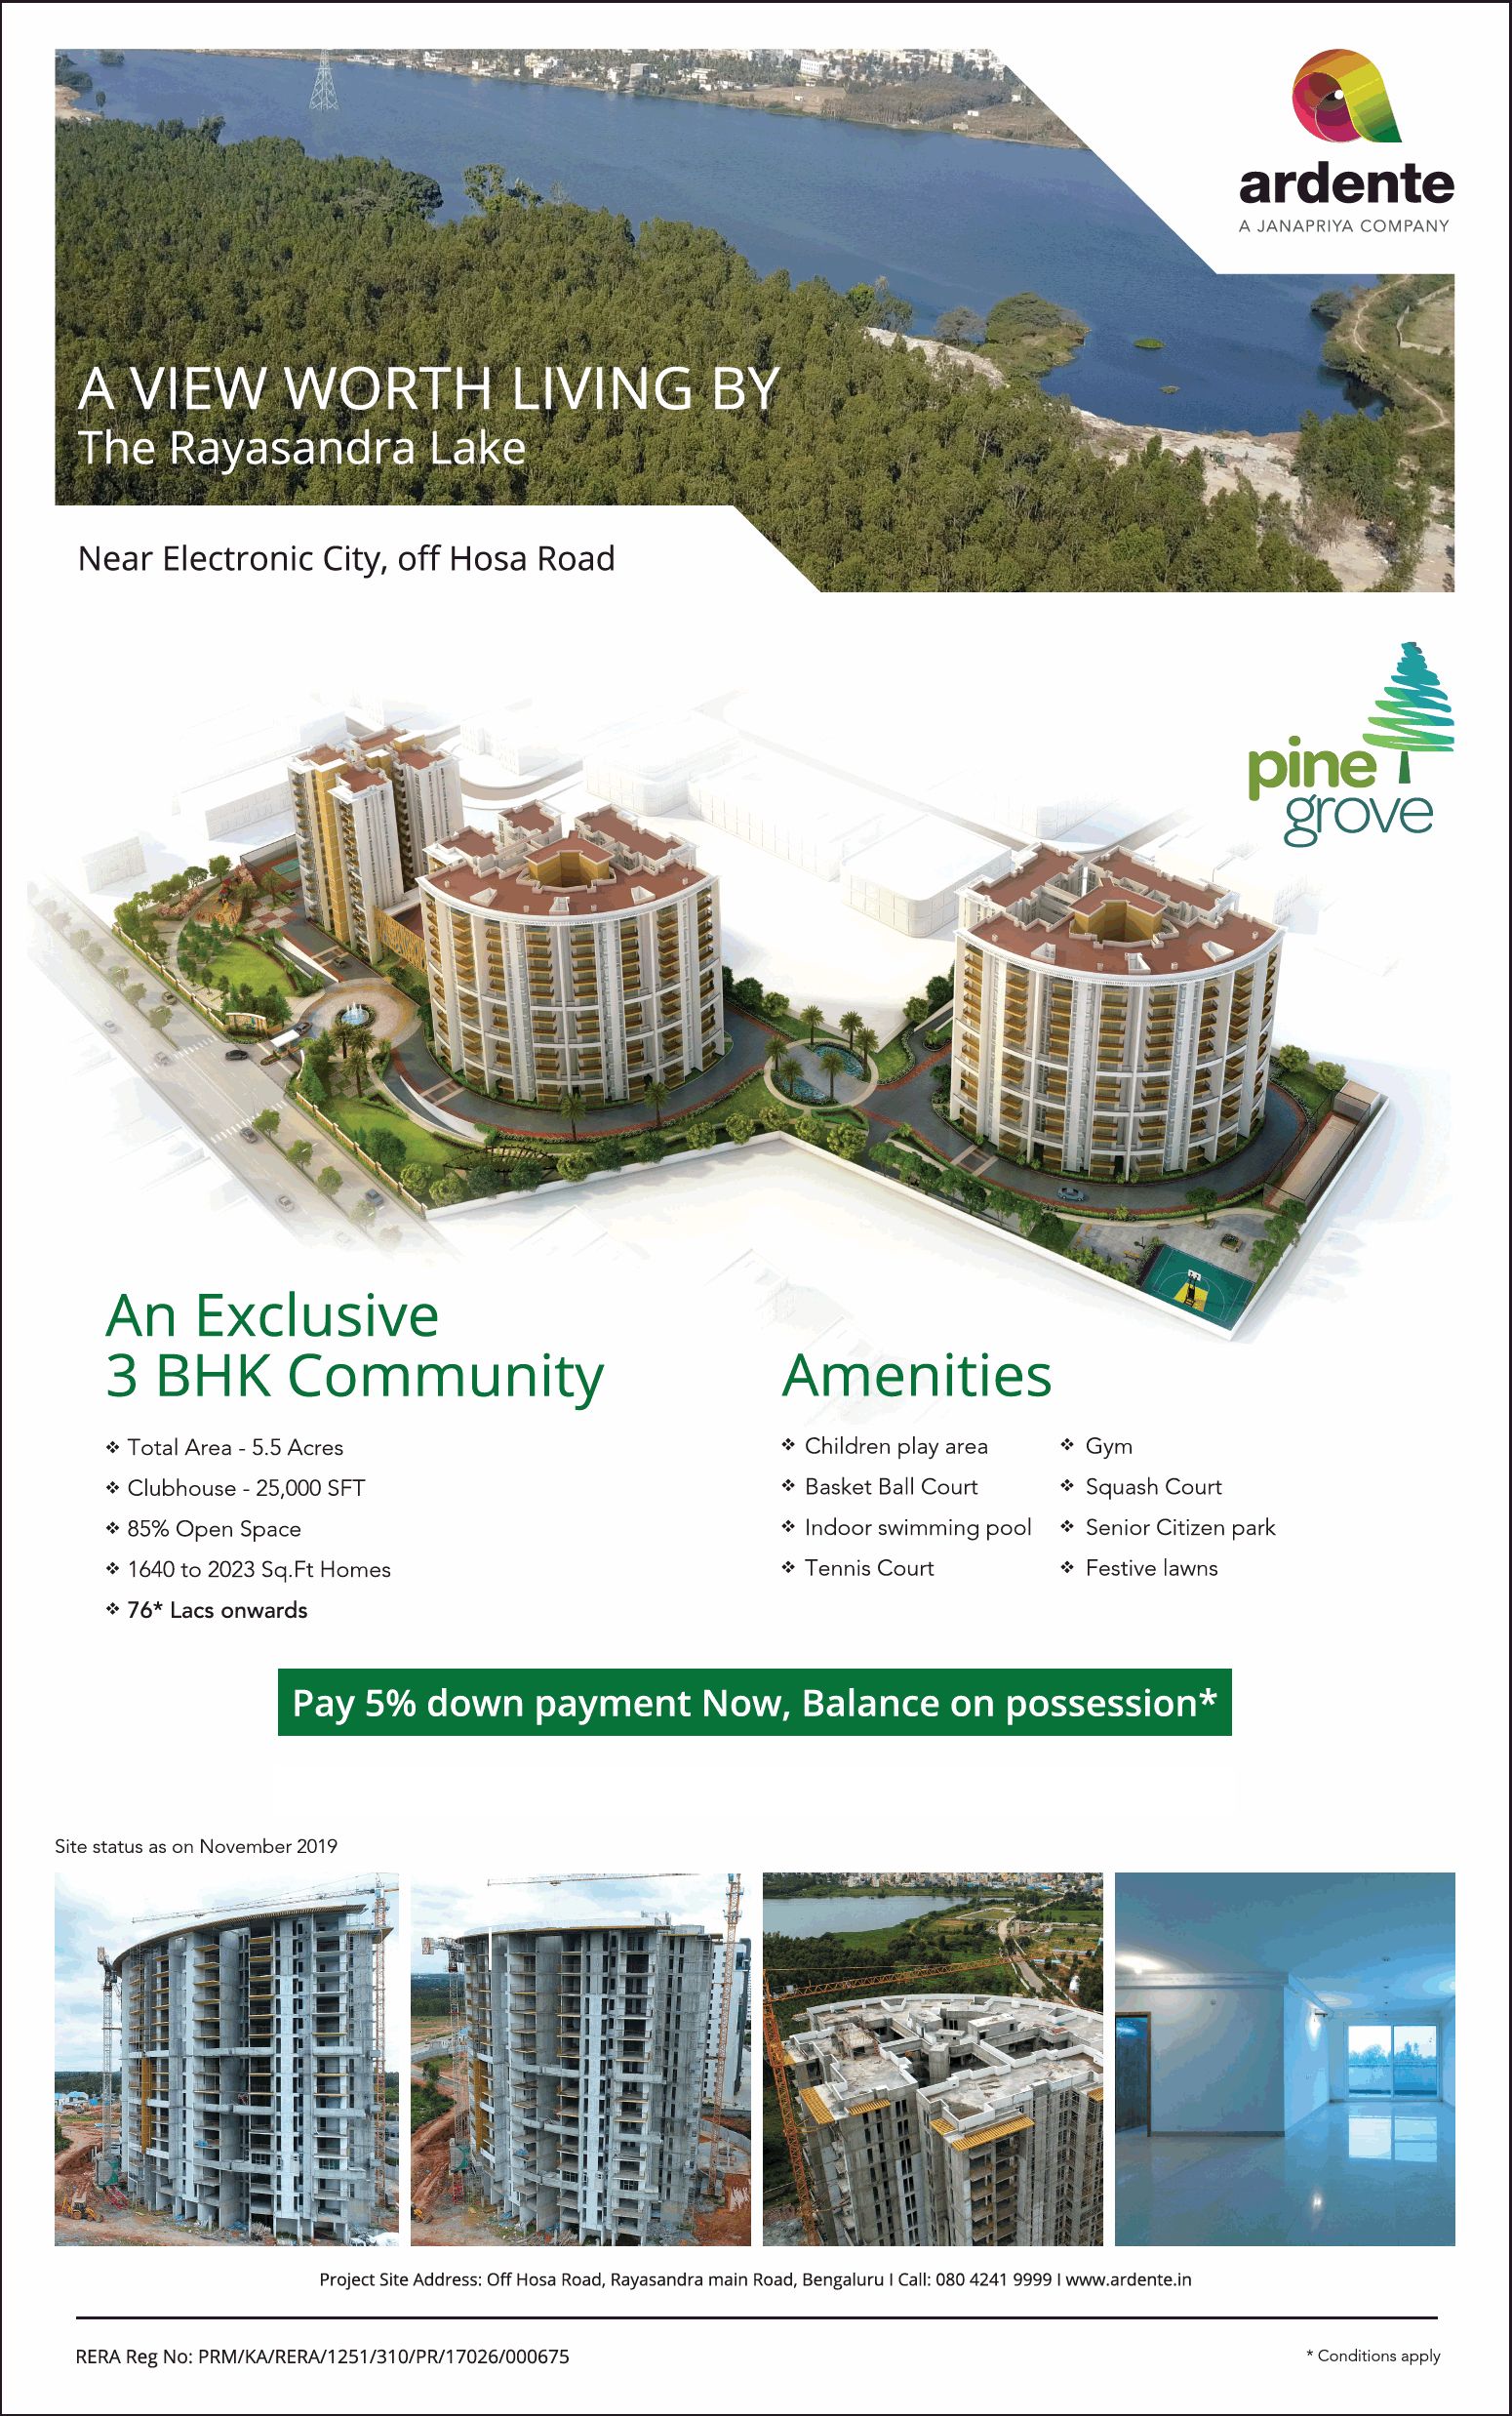 Pay 5% down payment now, balance on possession at Ardente Pine Grove, Bangalore